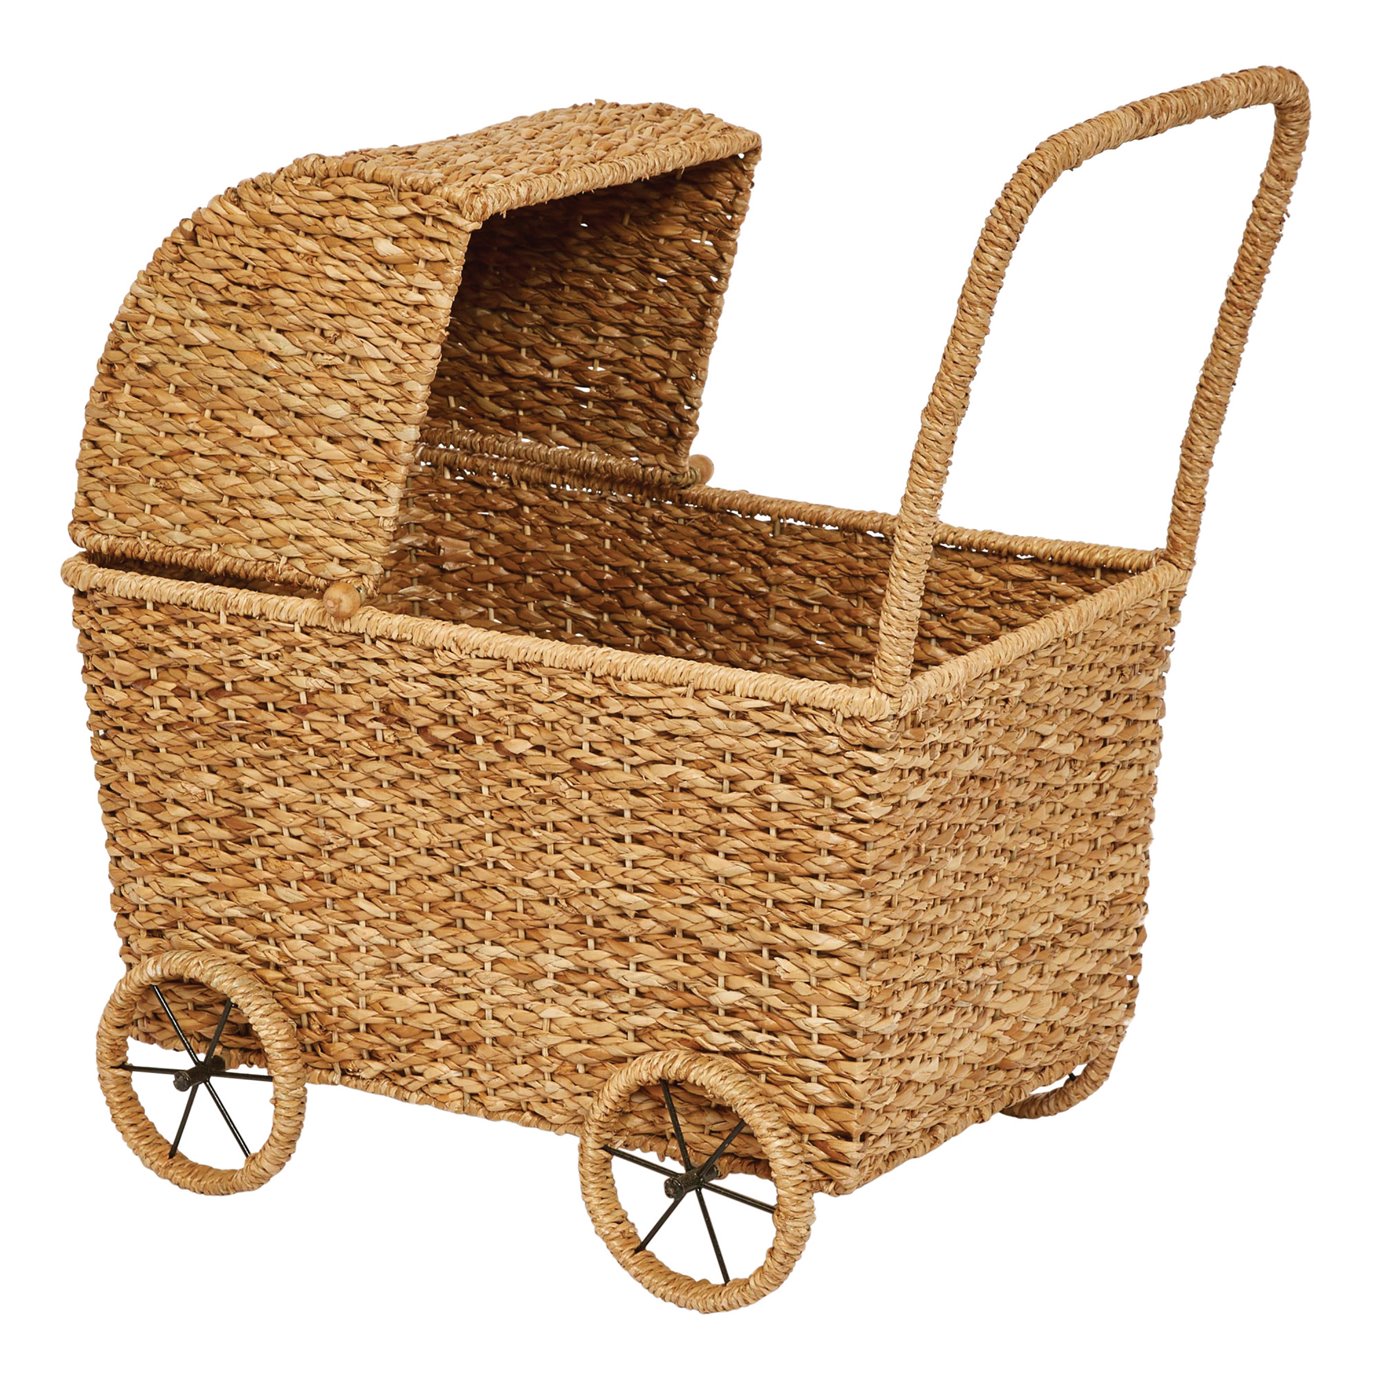 Handwoven Seagrass Doll Bassinet Stroller with Detachable Hood